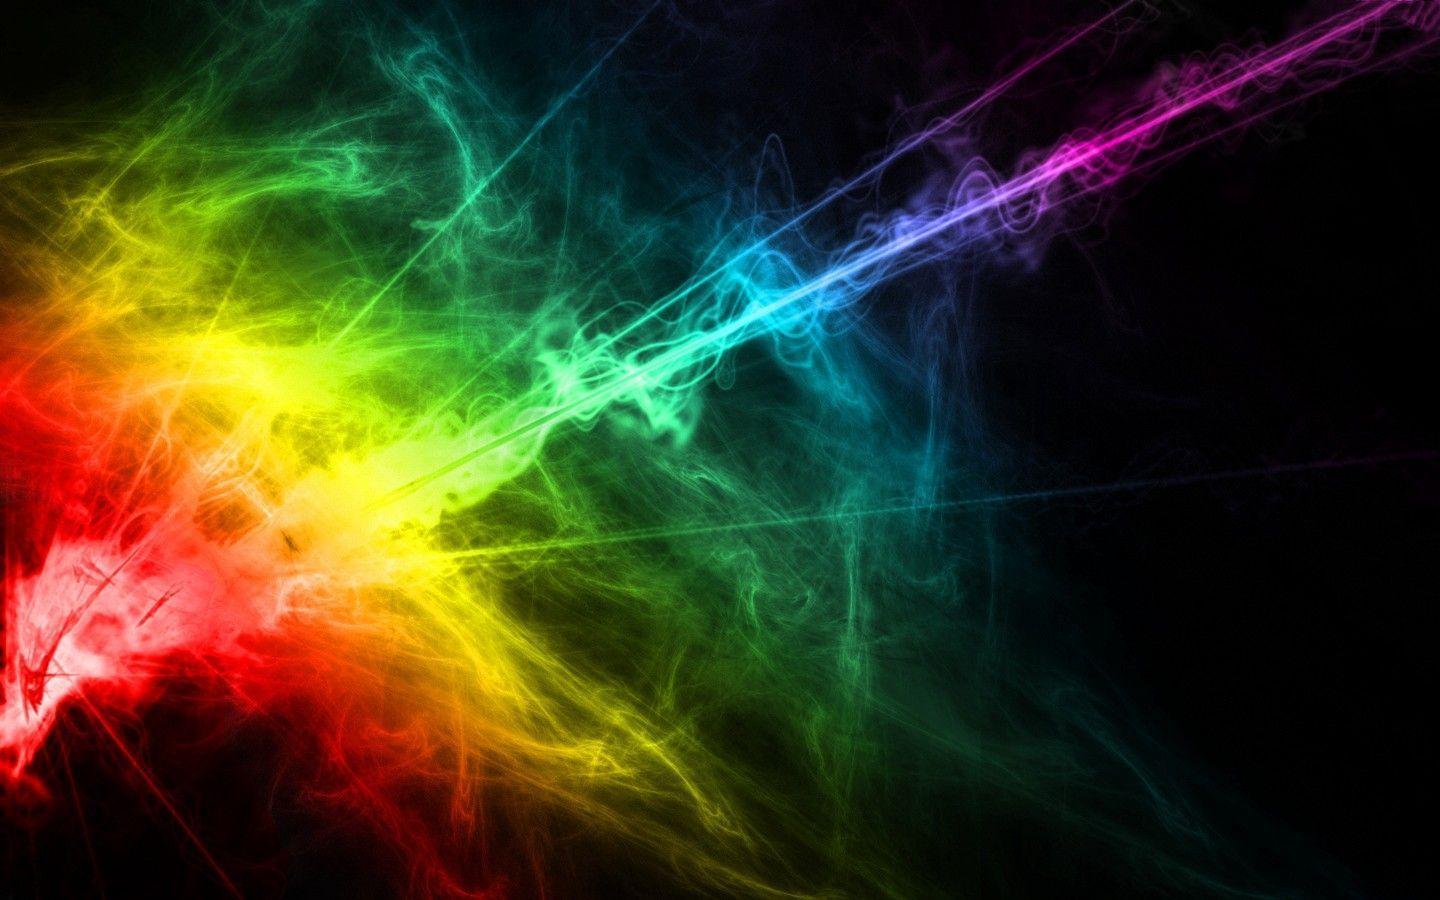 Colored Smoke Backgrounds Wallpaper Cave Coloring Wallpapers Download Free Images Wallpaper [coloring654.blogspot.com]